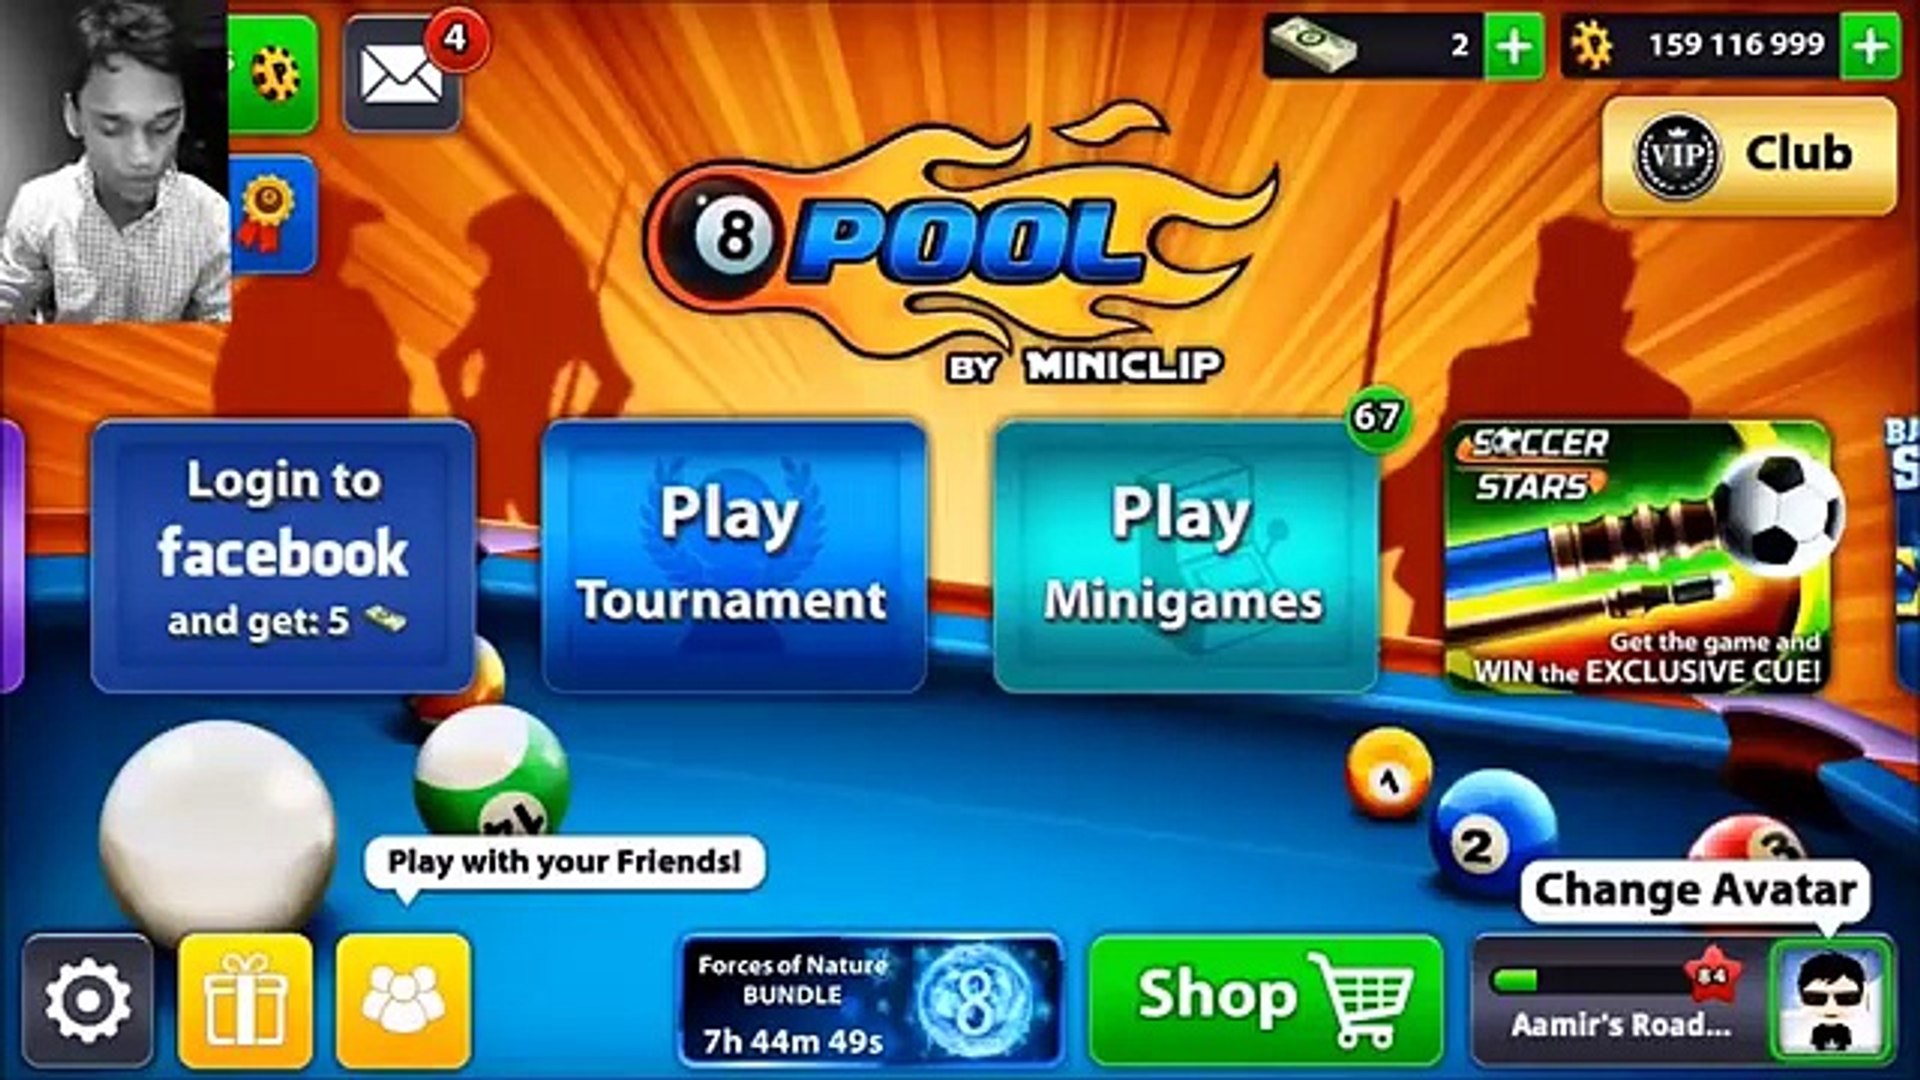 Unlimited 8 Ball Pool Coins Prank Android APK Free Download – APKTurbo